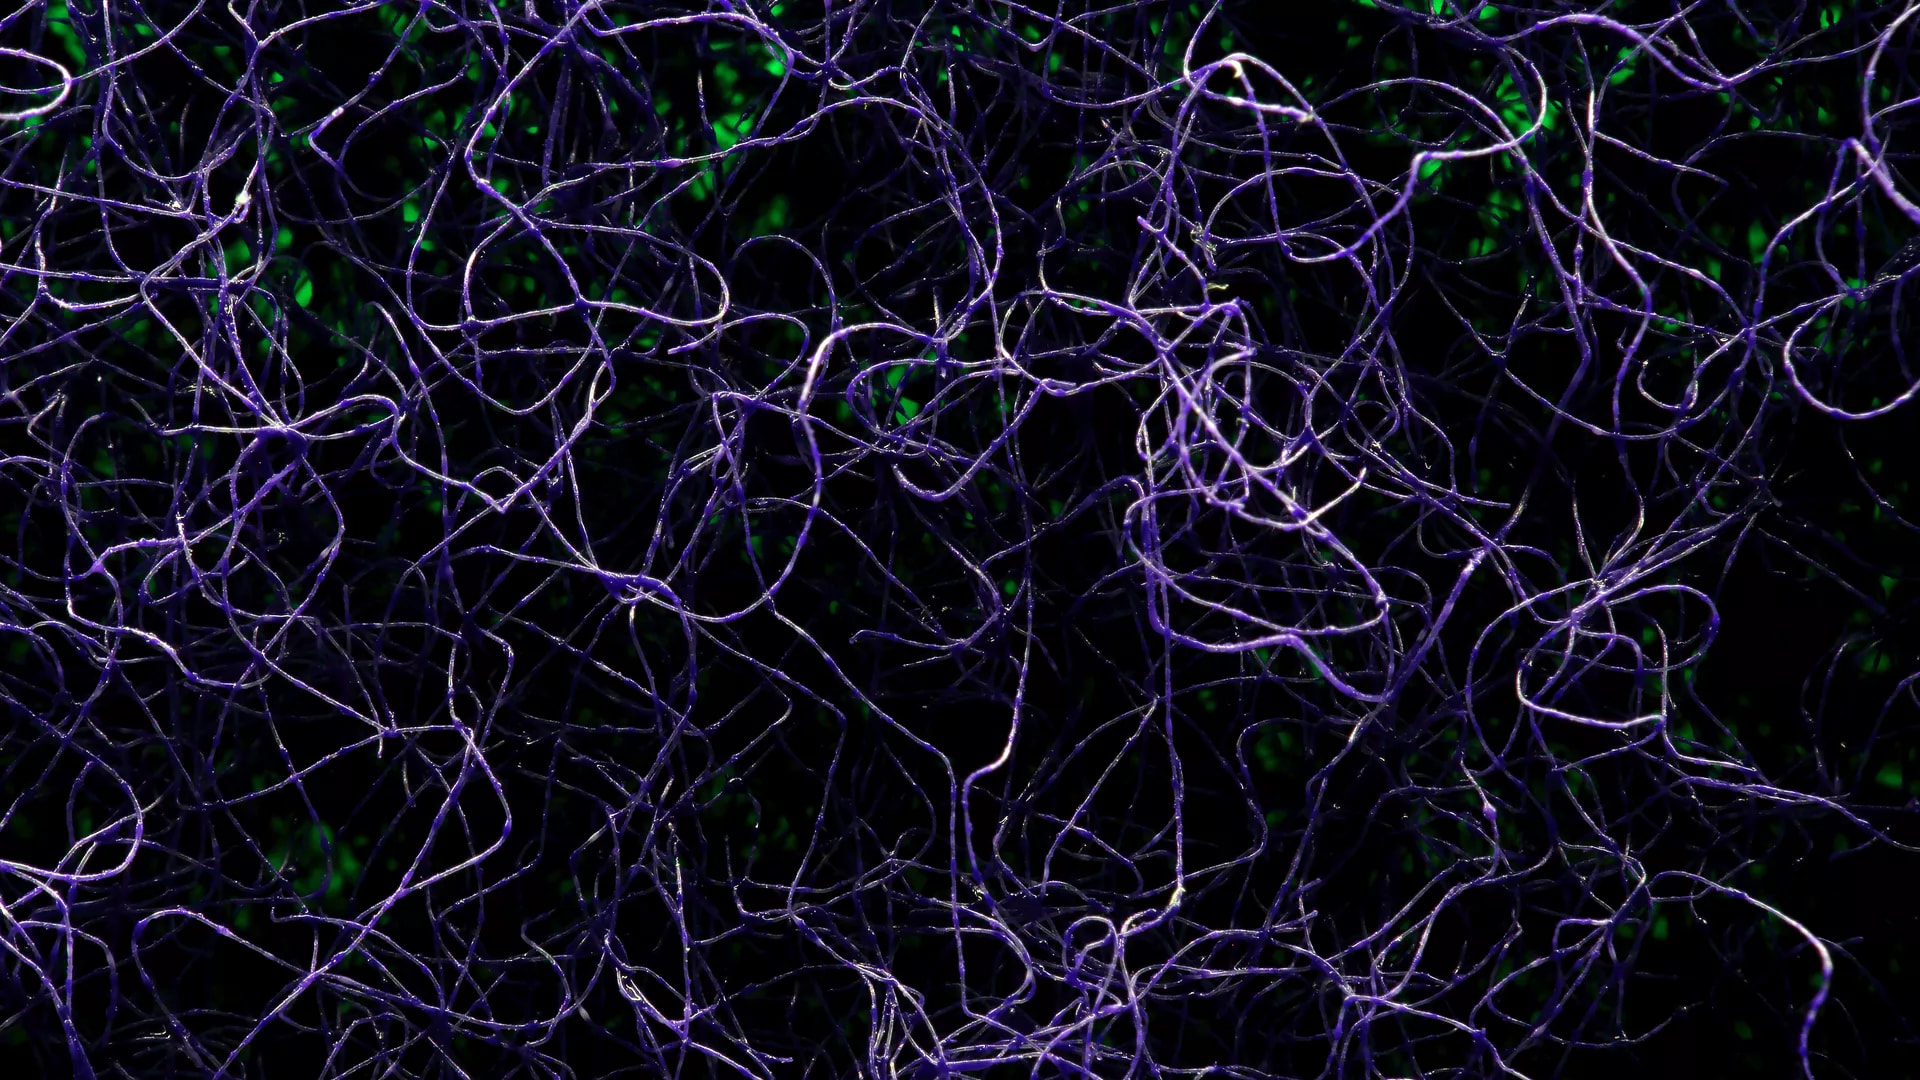 Cover image for "Recent Advances in Fluorescent Indicators to Study Neural Dynamics Across Different Scales"